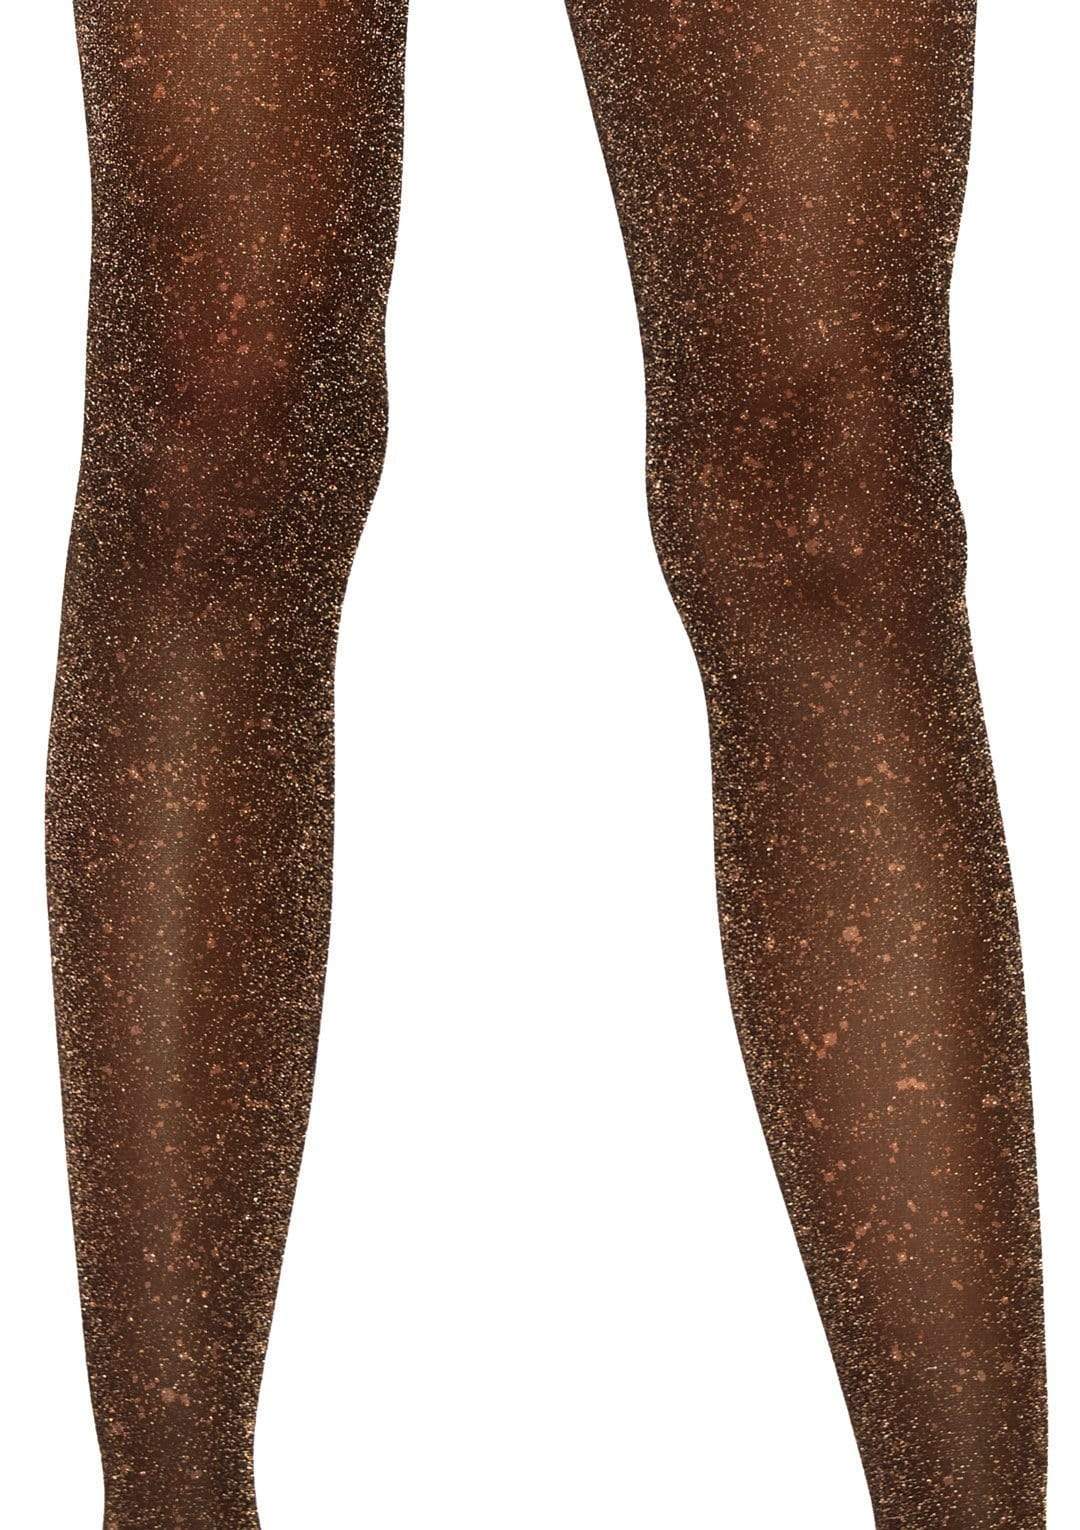 Lurex Glitter Fashion Tights LA7120, Leg Avenue, Colored Specialty  Prints, Patterned Tights, Holiday Tights, Specialty Print Pantyhose, Black, Purple, Blue, Red, Pink